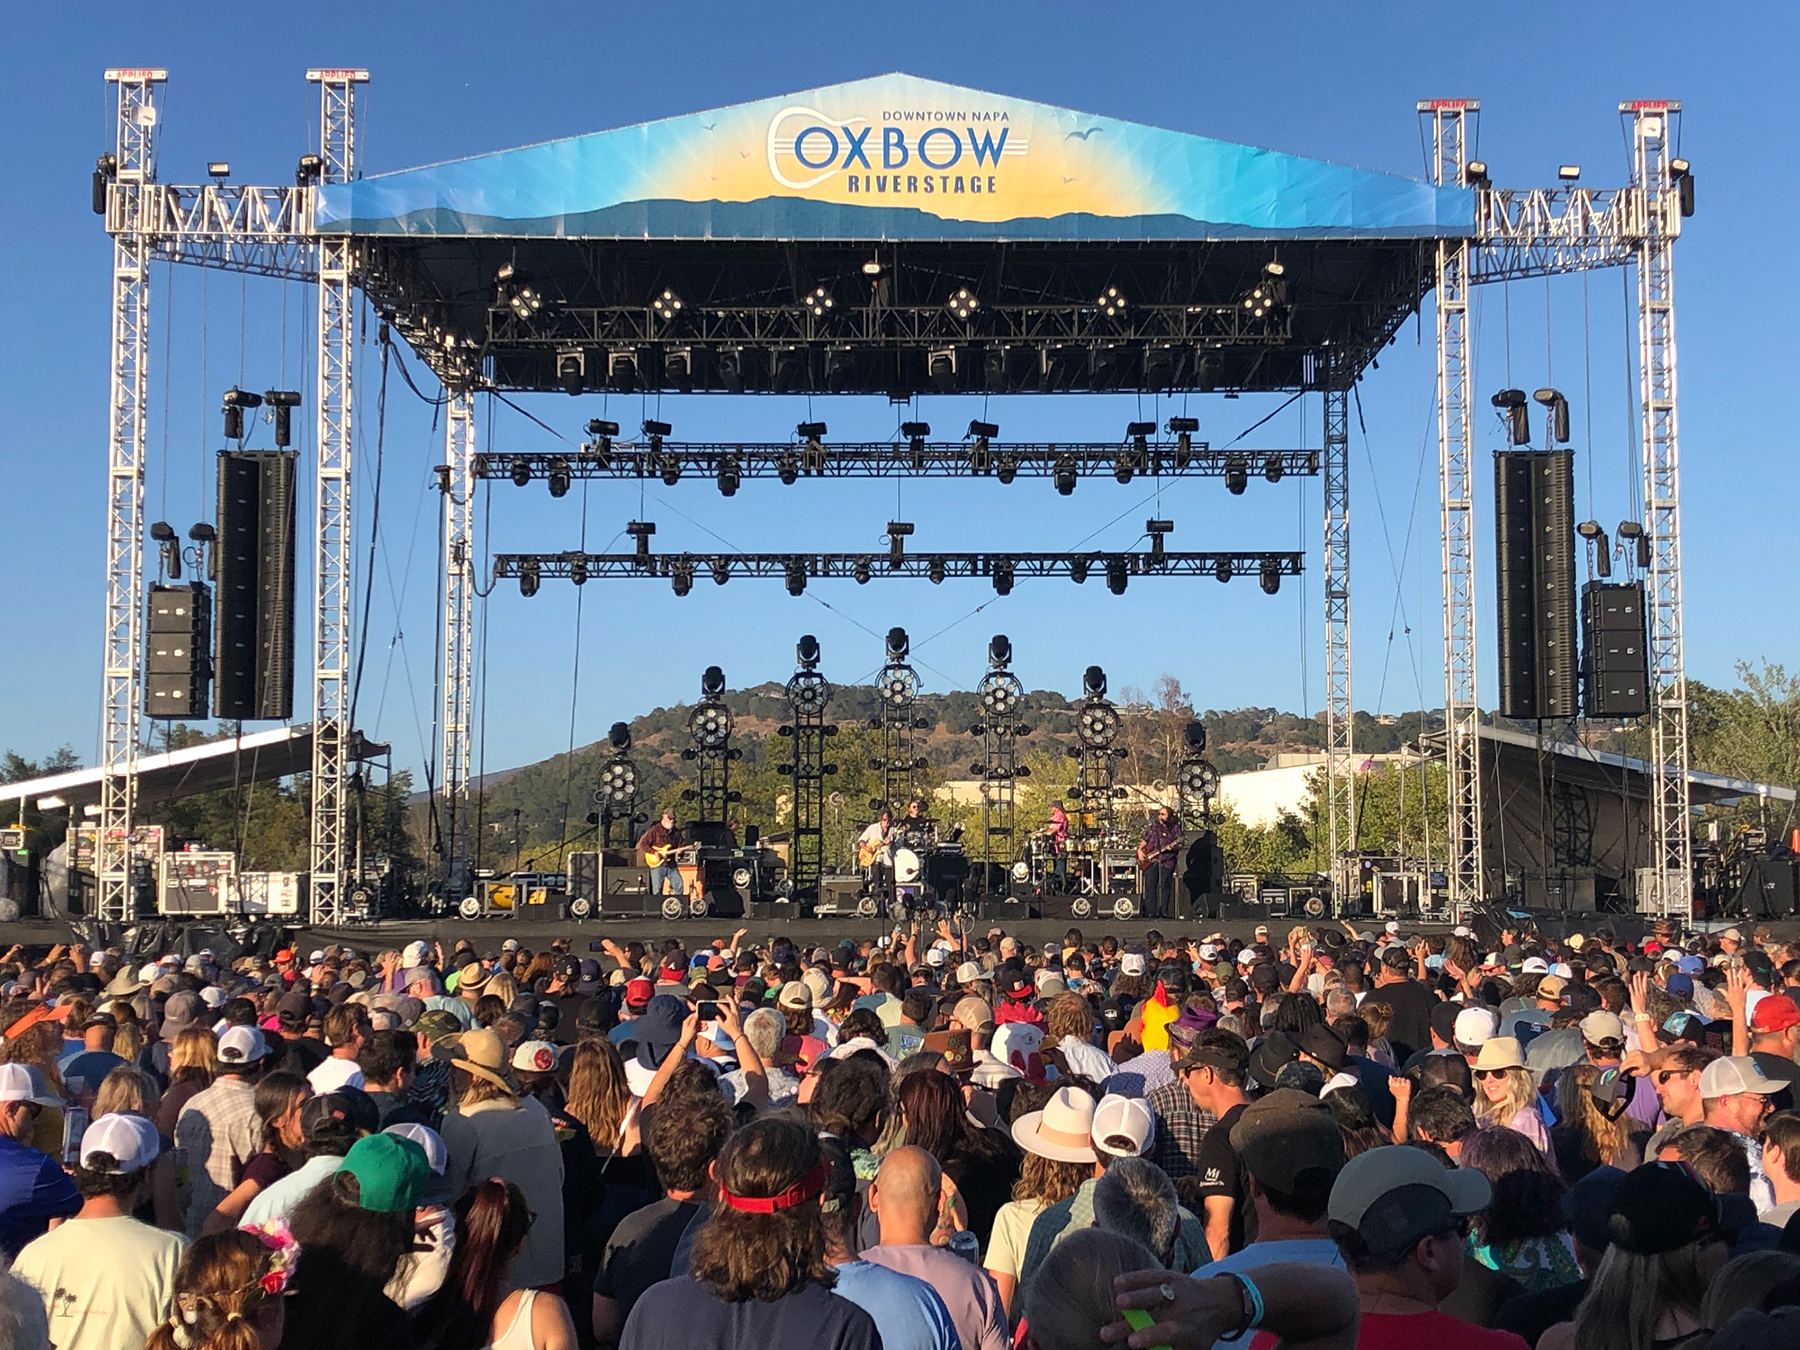 OXBOW RIVERSTAGE OFFERS WORLD CLASS SOUND QUALITY WITH EAW® ADAPTIVE